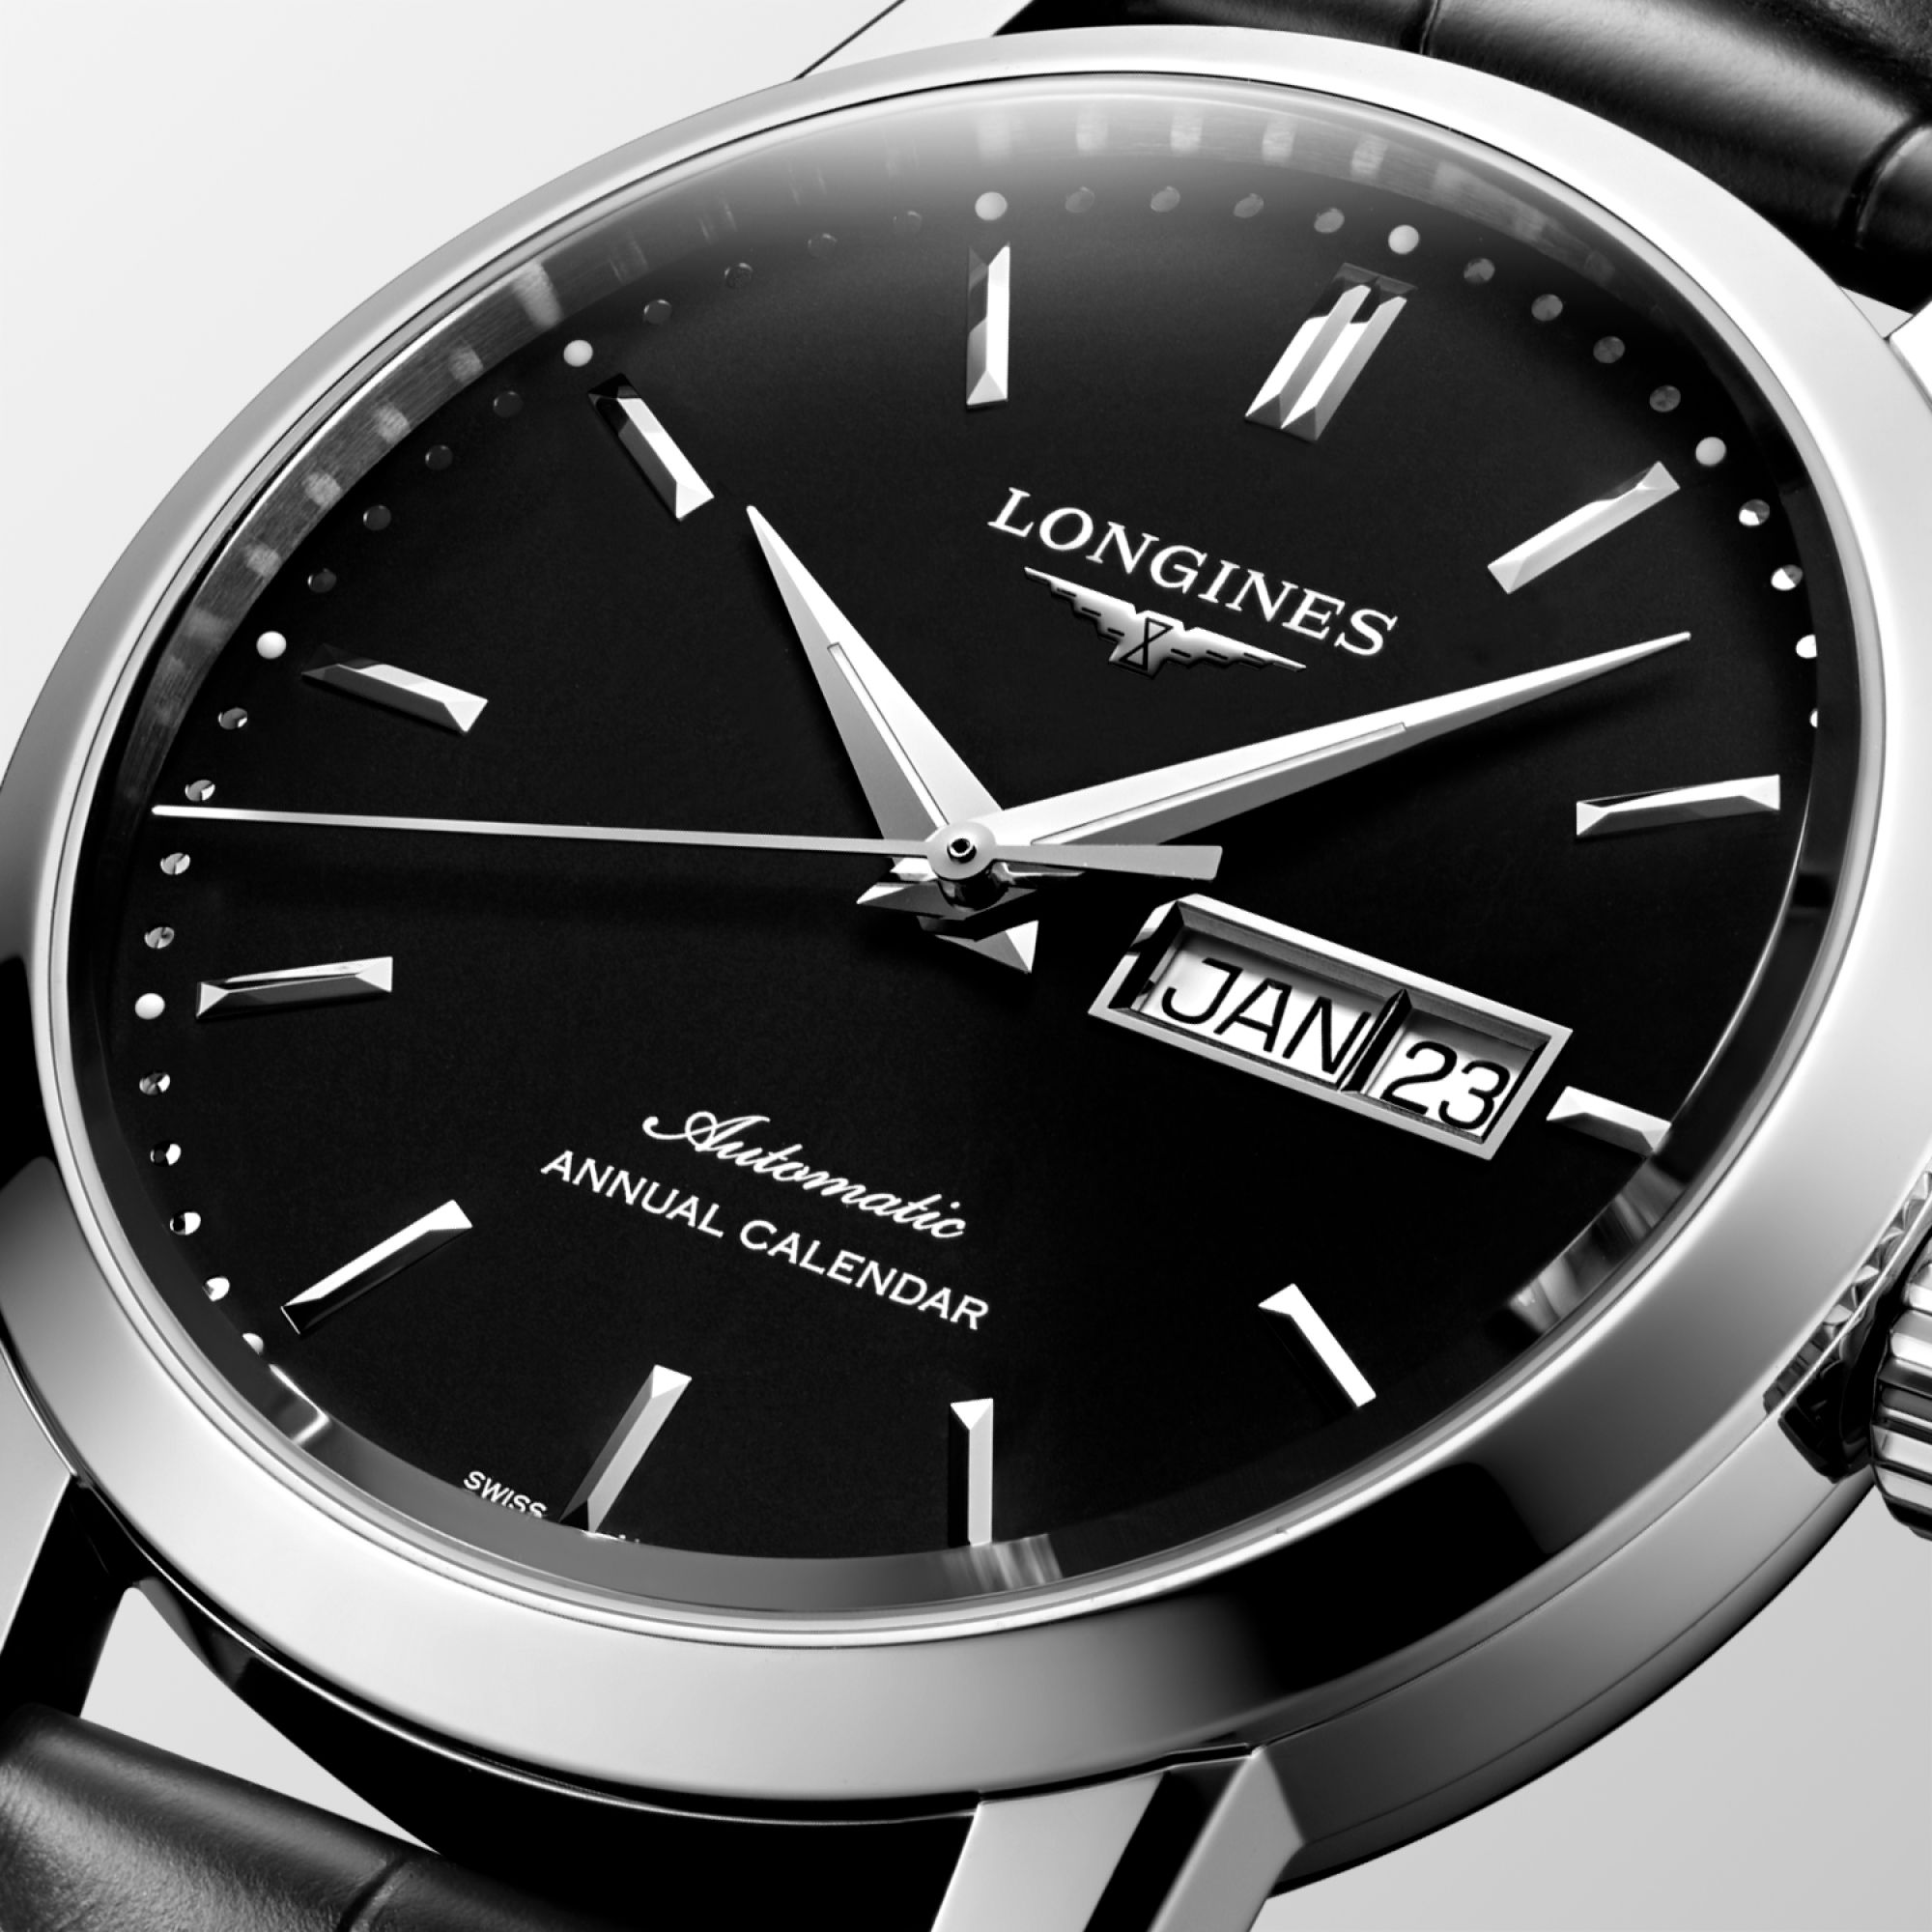 The Longines 1832 Watchmaking Tradition Référence :  L4.827.4.52.0 -2